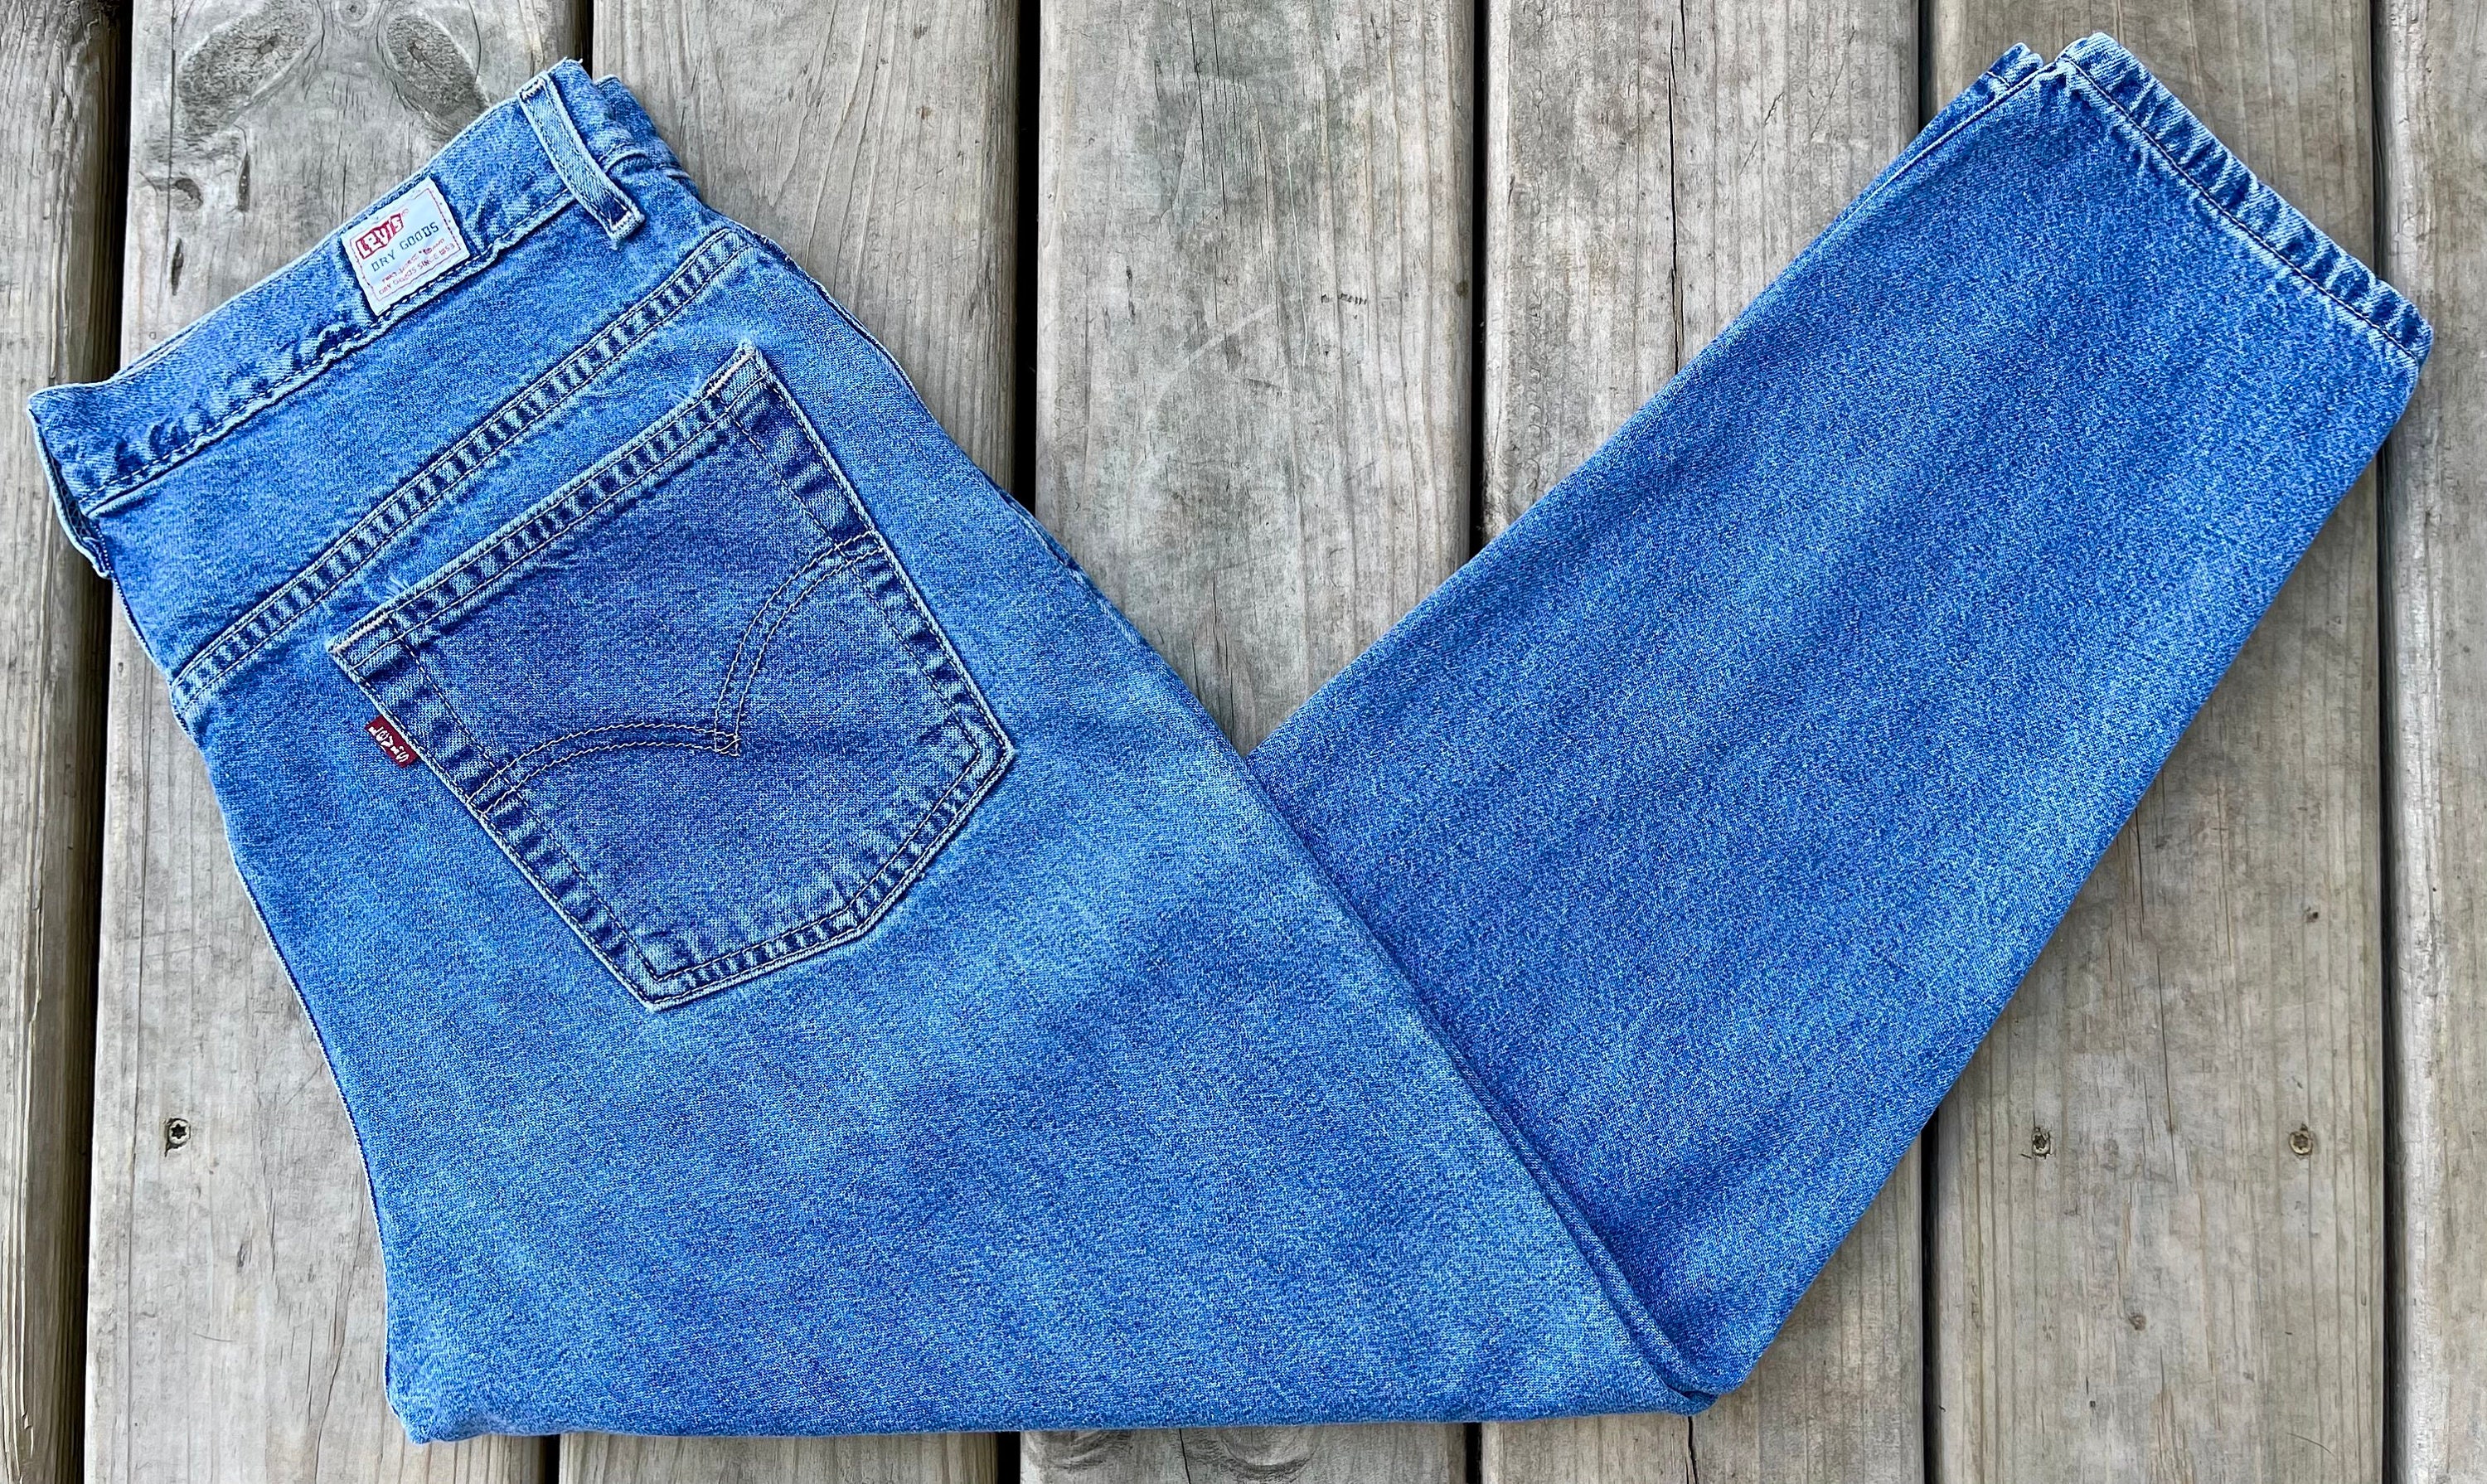 Levis Dry Goods Pedal Pusher Jeans - Etsy